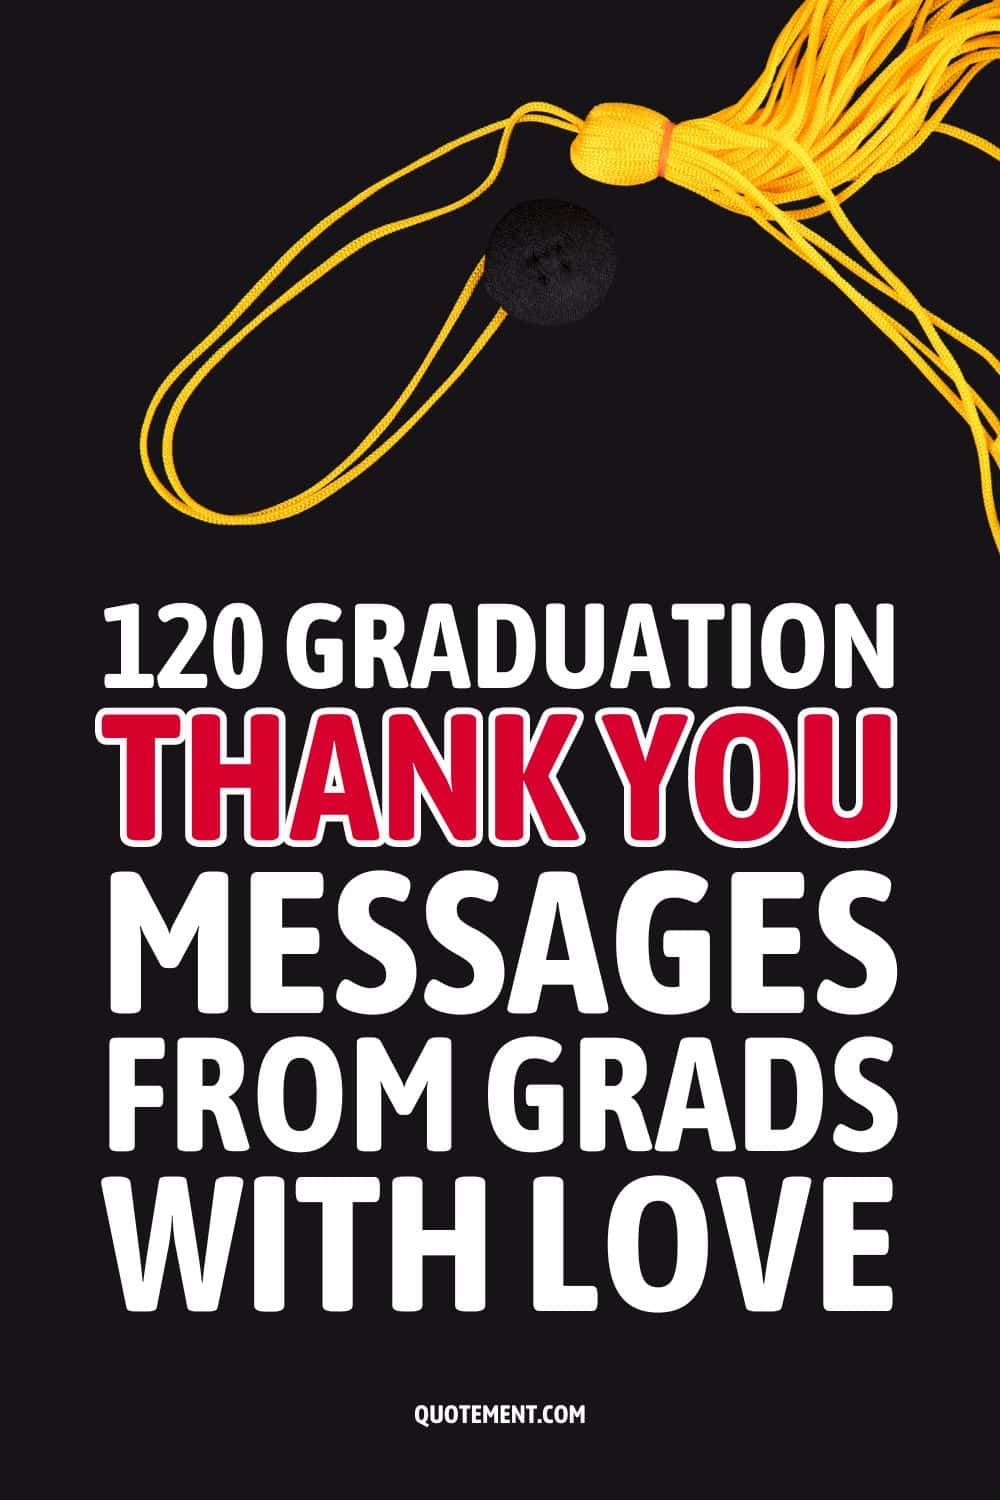 120 Graduation Thank You Messages From Grads With Love 